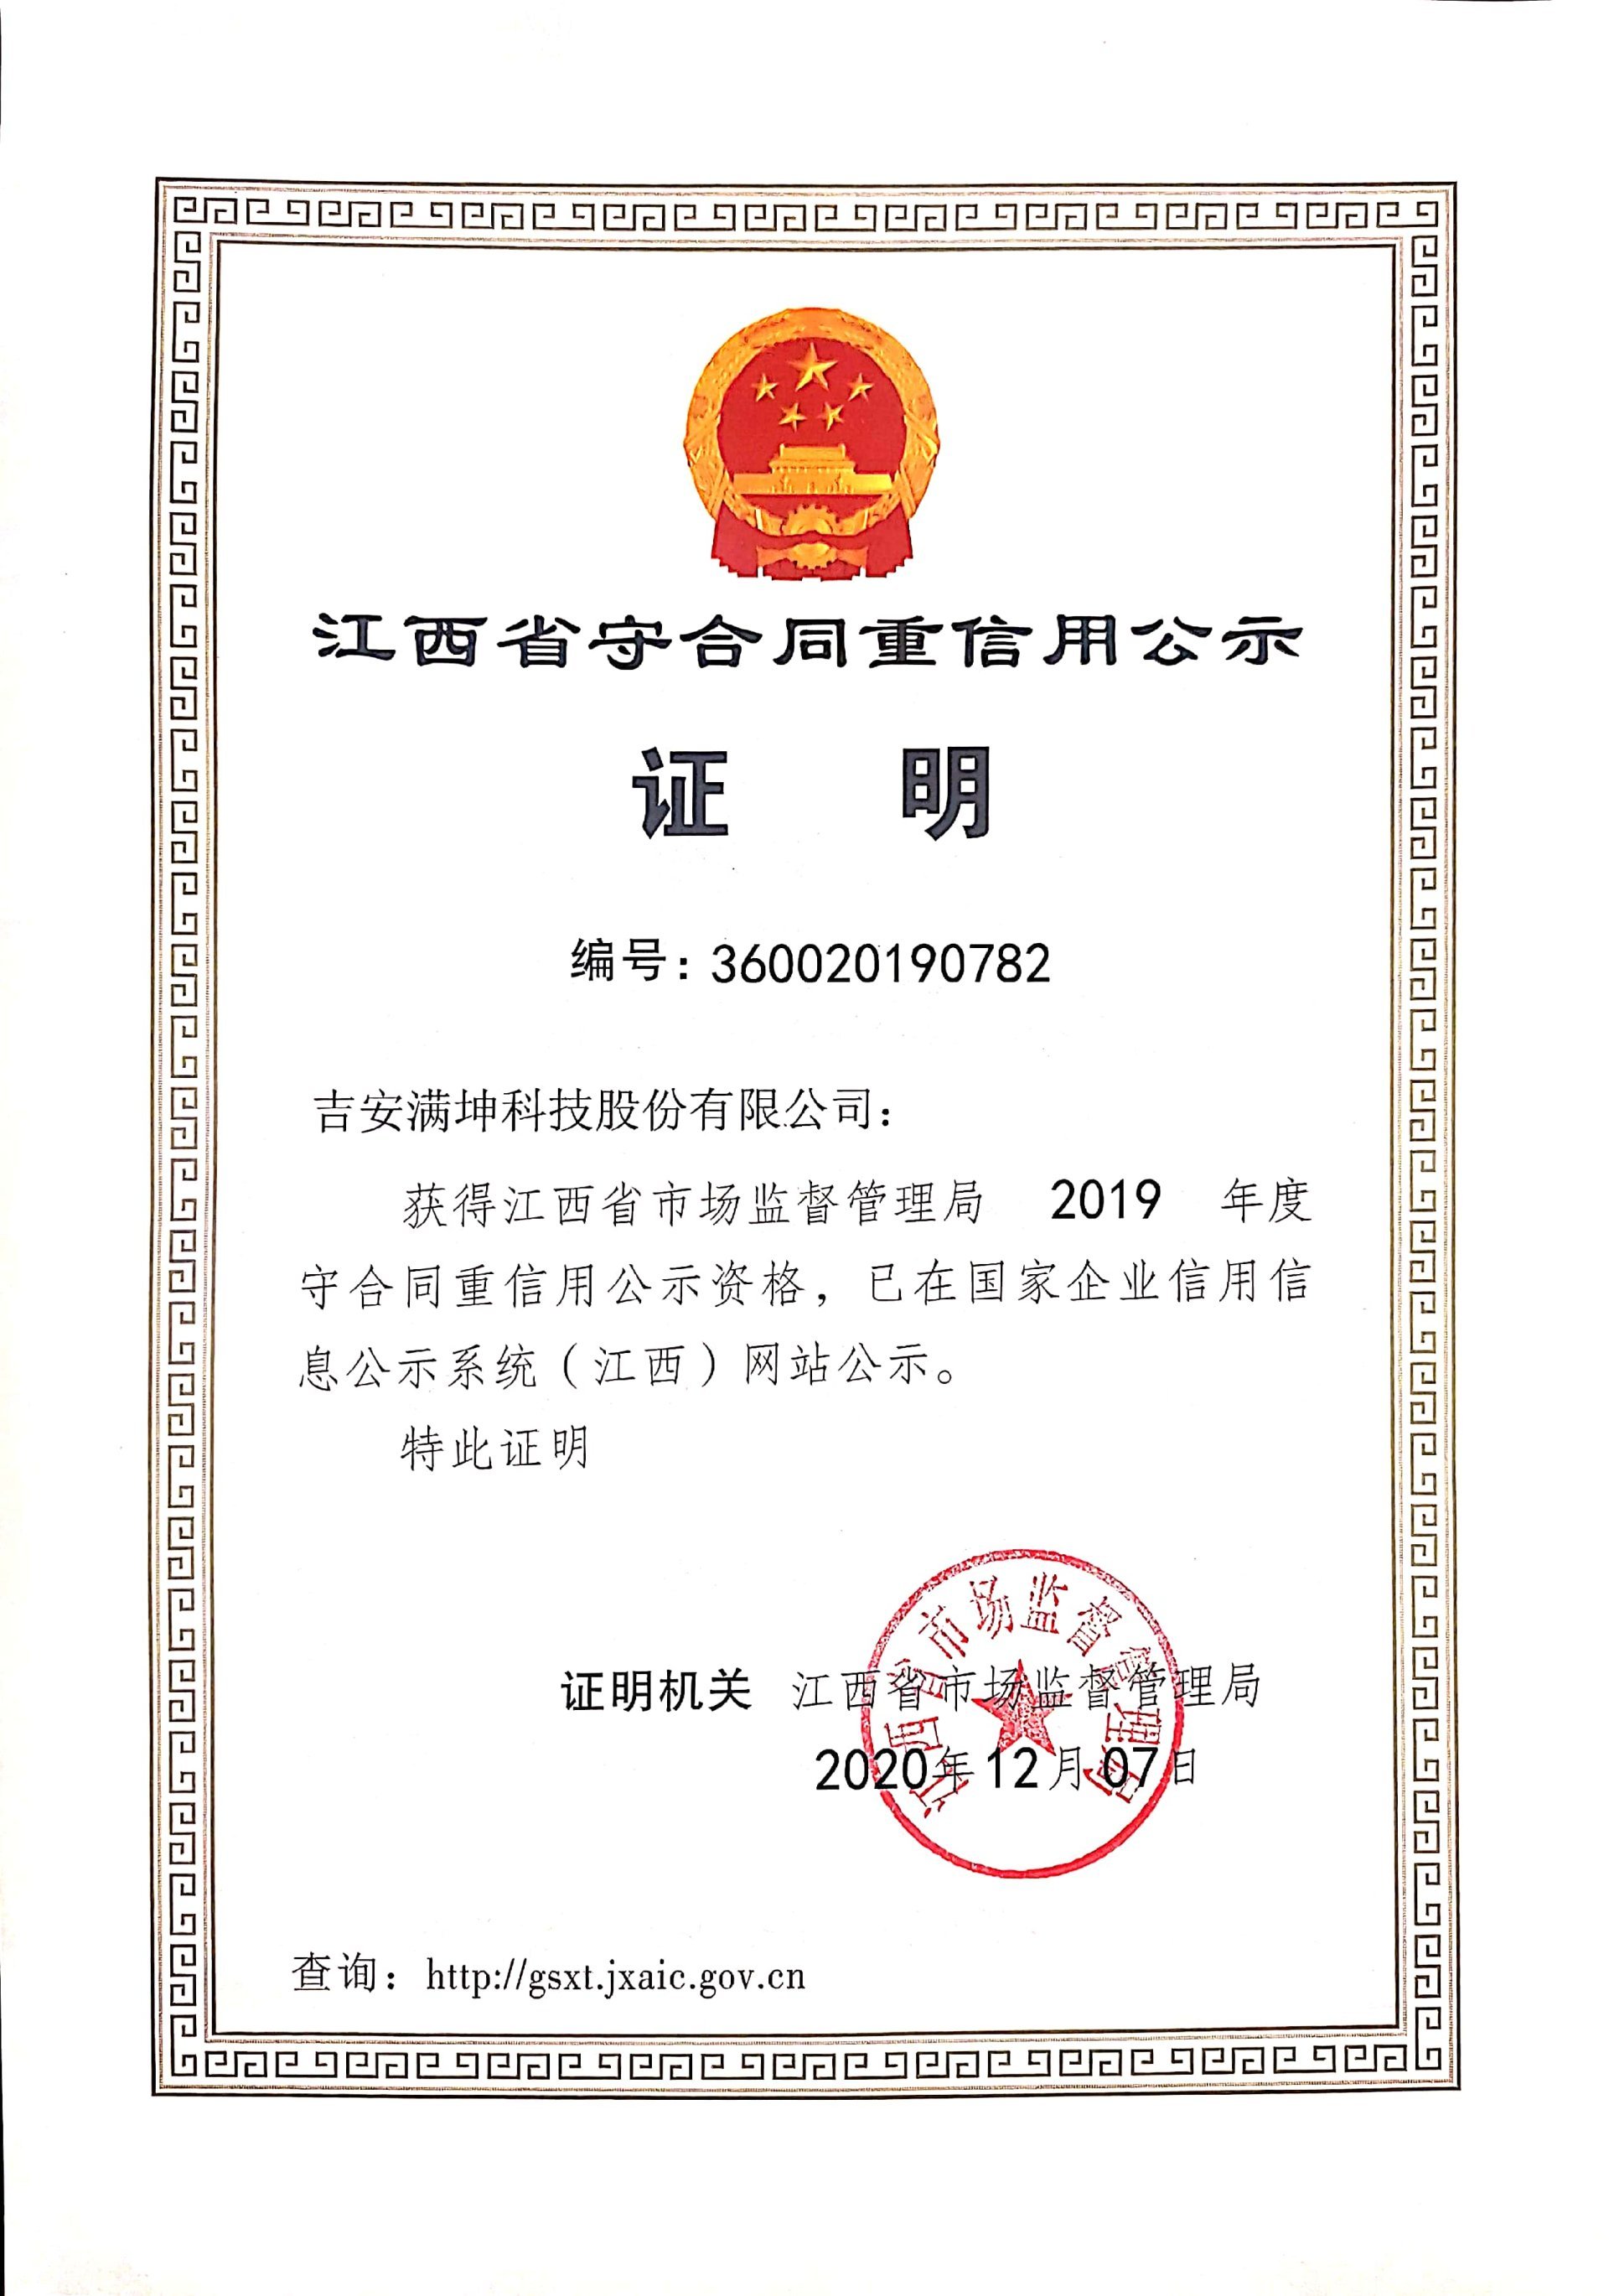 2019 Jiangxi Province Contract abiding and Credit keeping Publicity Certificate